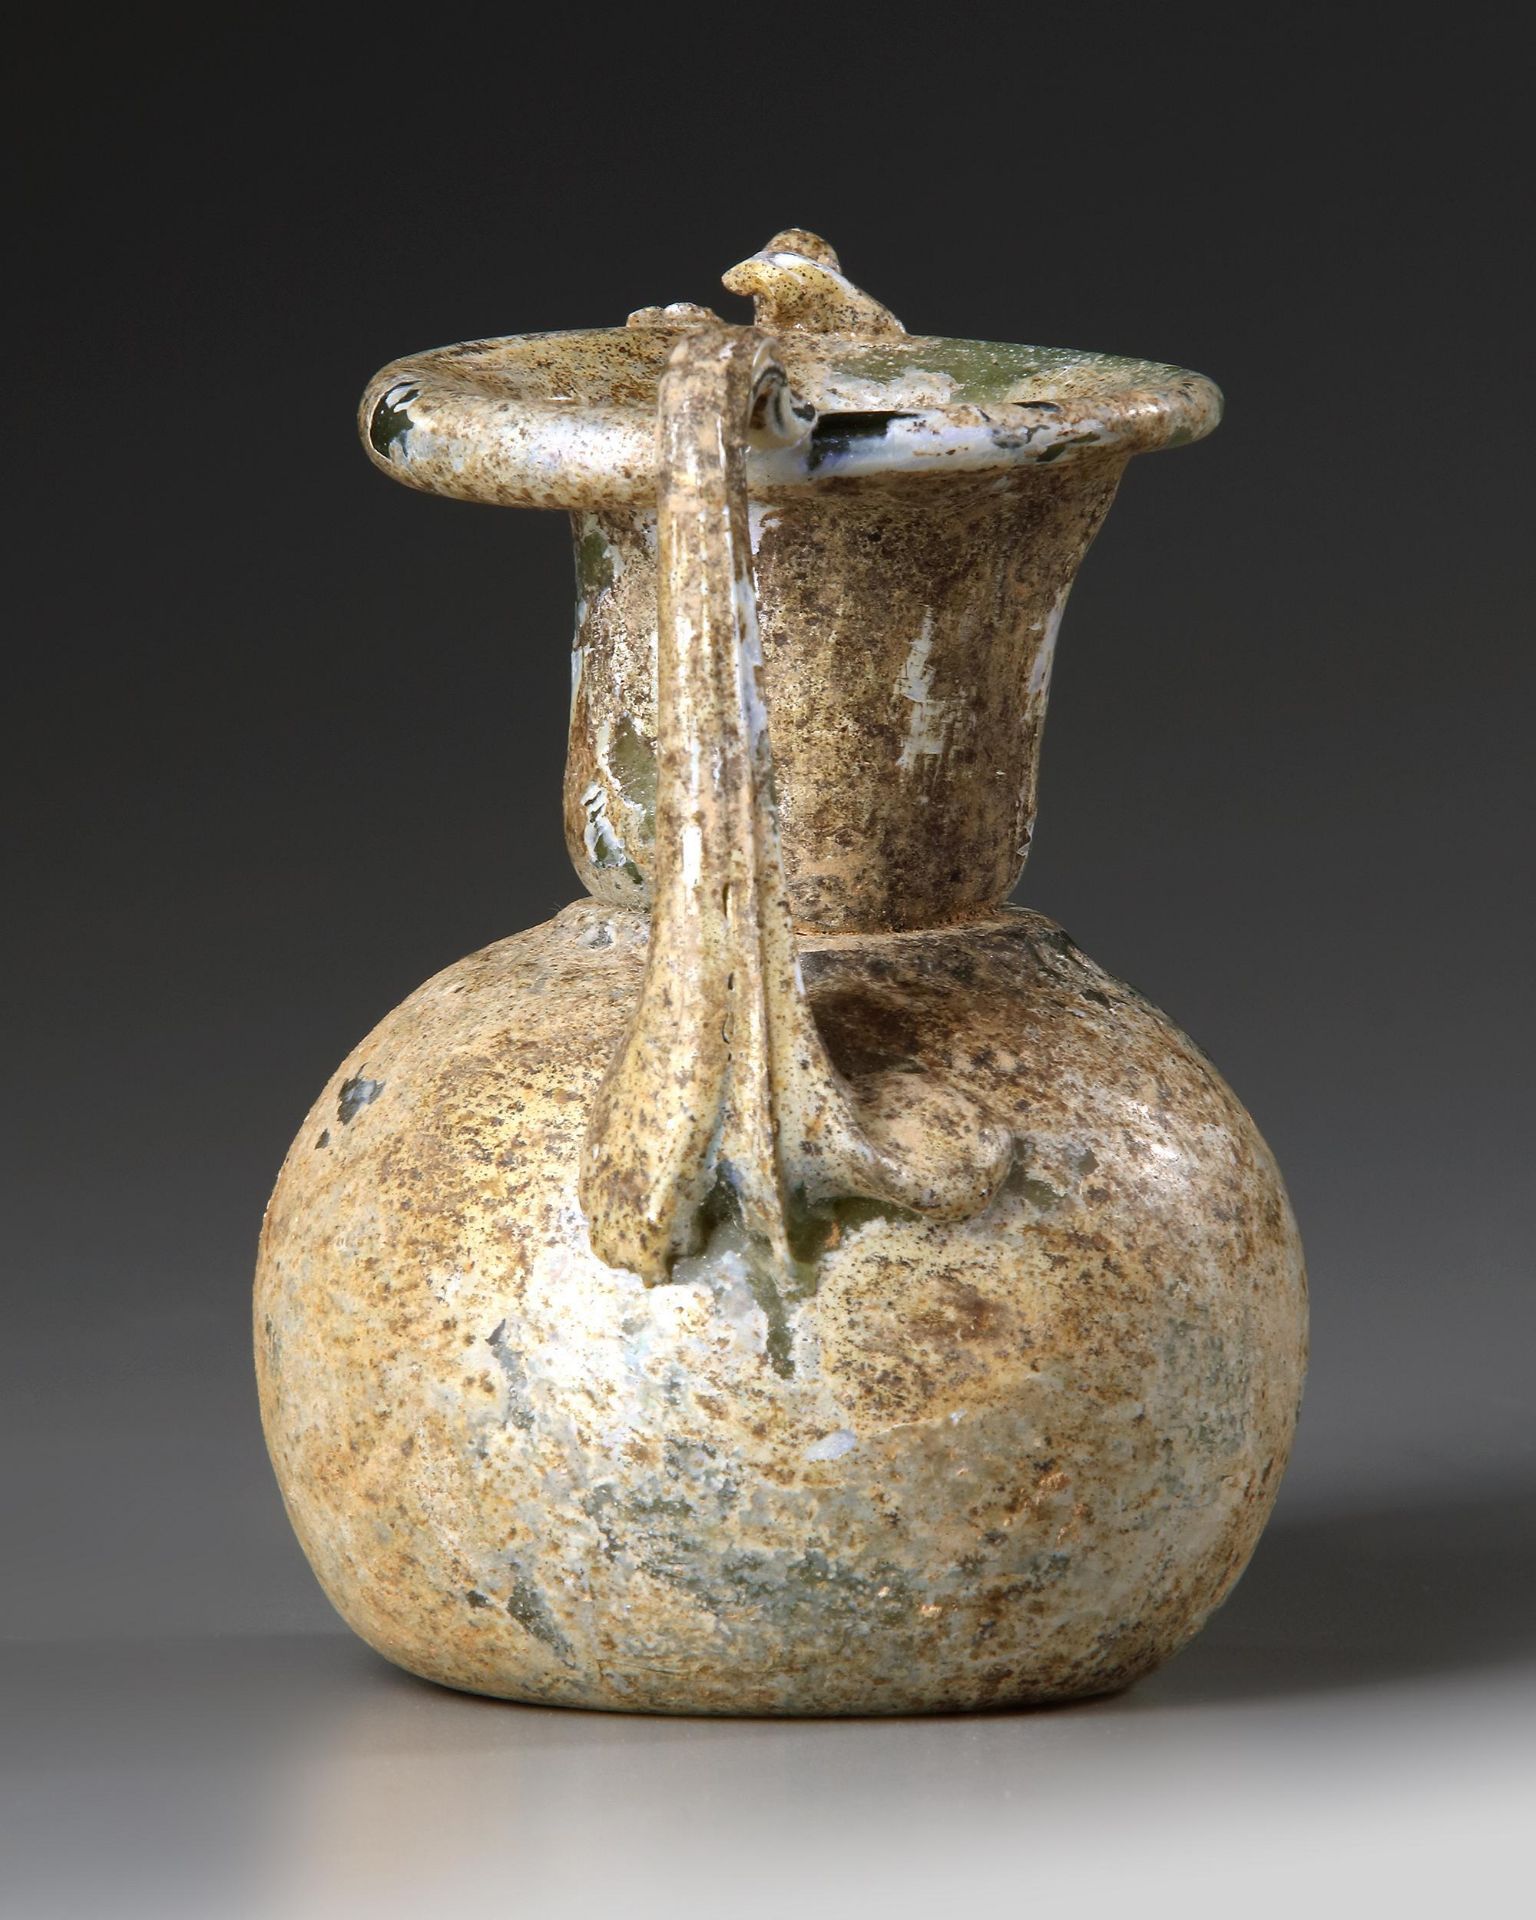 A ROMAN GLASS JAR WITH TWO HANDLES, CIRCA 3RD-4TH CENTURY A.D. - Image 2 of 4